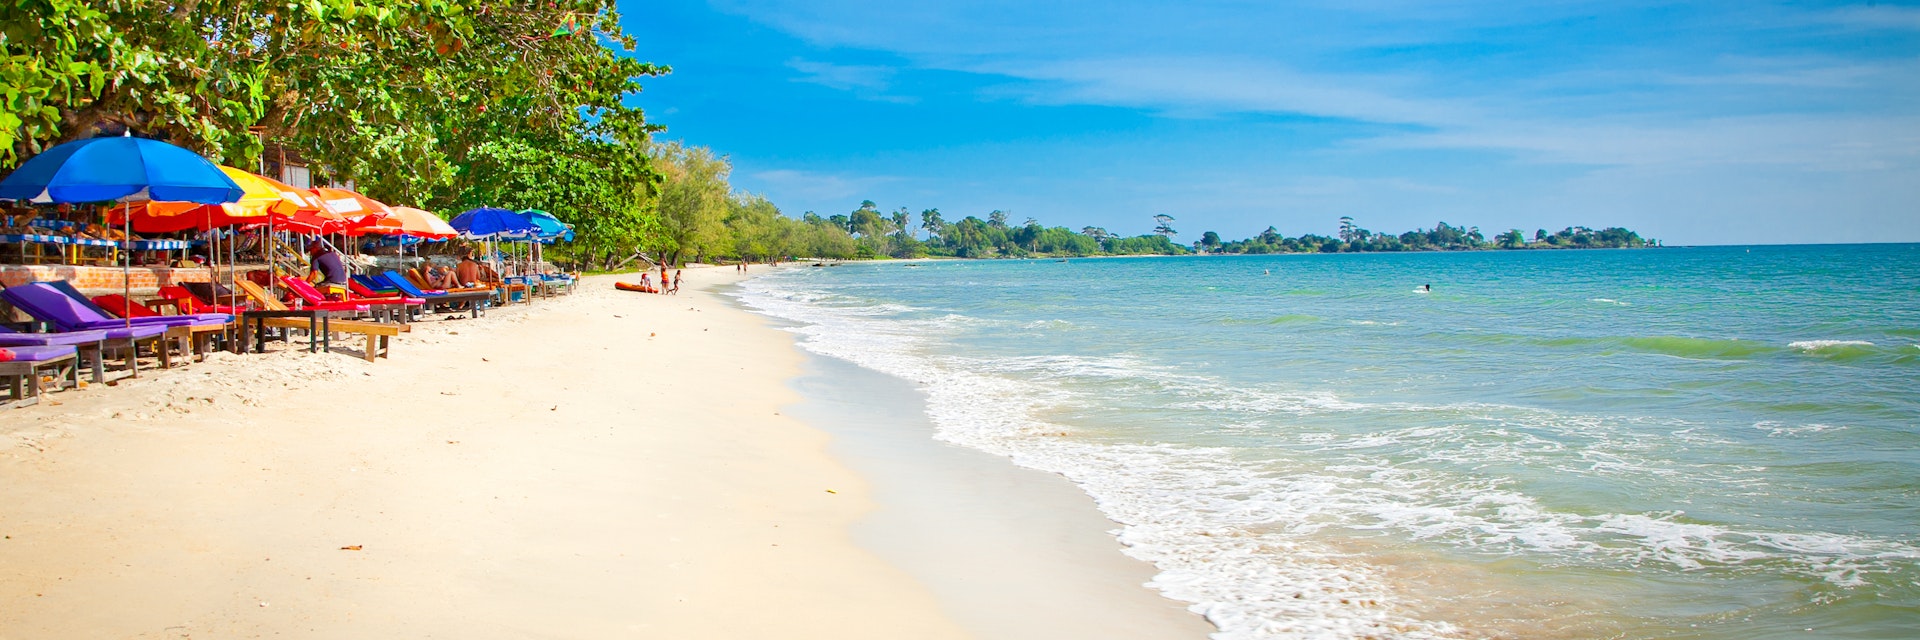 Beautiful tropical Independence beach in Sihanoukville, Cambodia .; Shutterstock ID 174307274; Your name (First / Last): Josh Vogel; GL account no.: 56530; Netsuite department name: Online Design; Full Product or Project name including edition: Digital Content/Sights